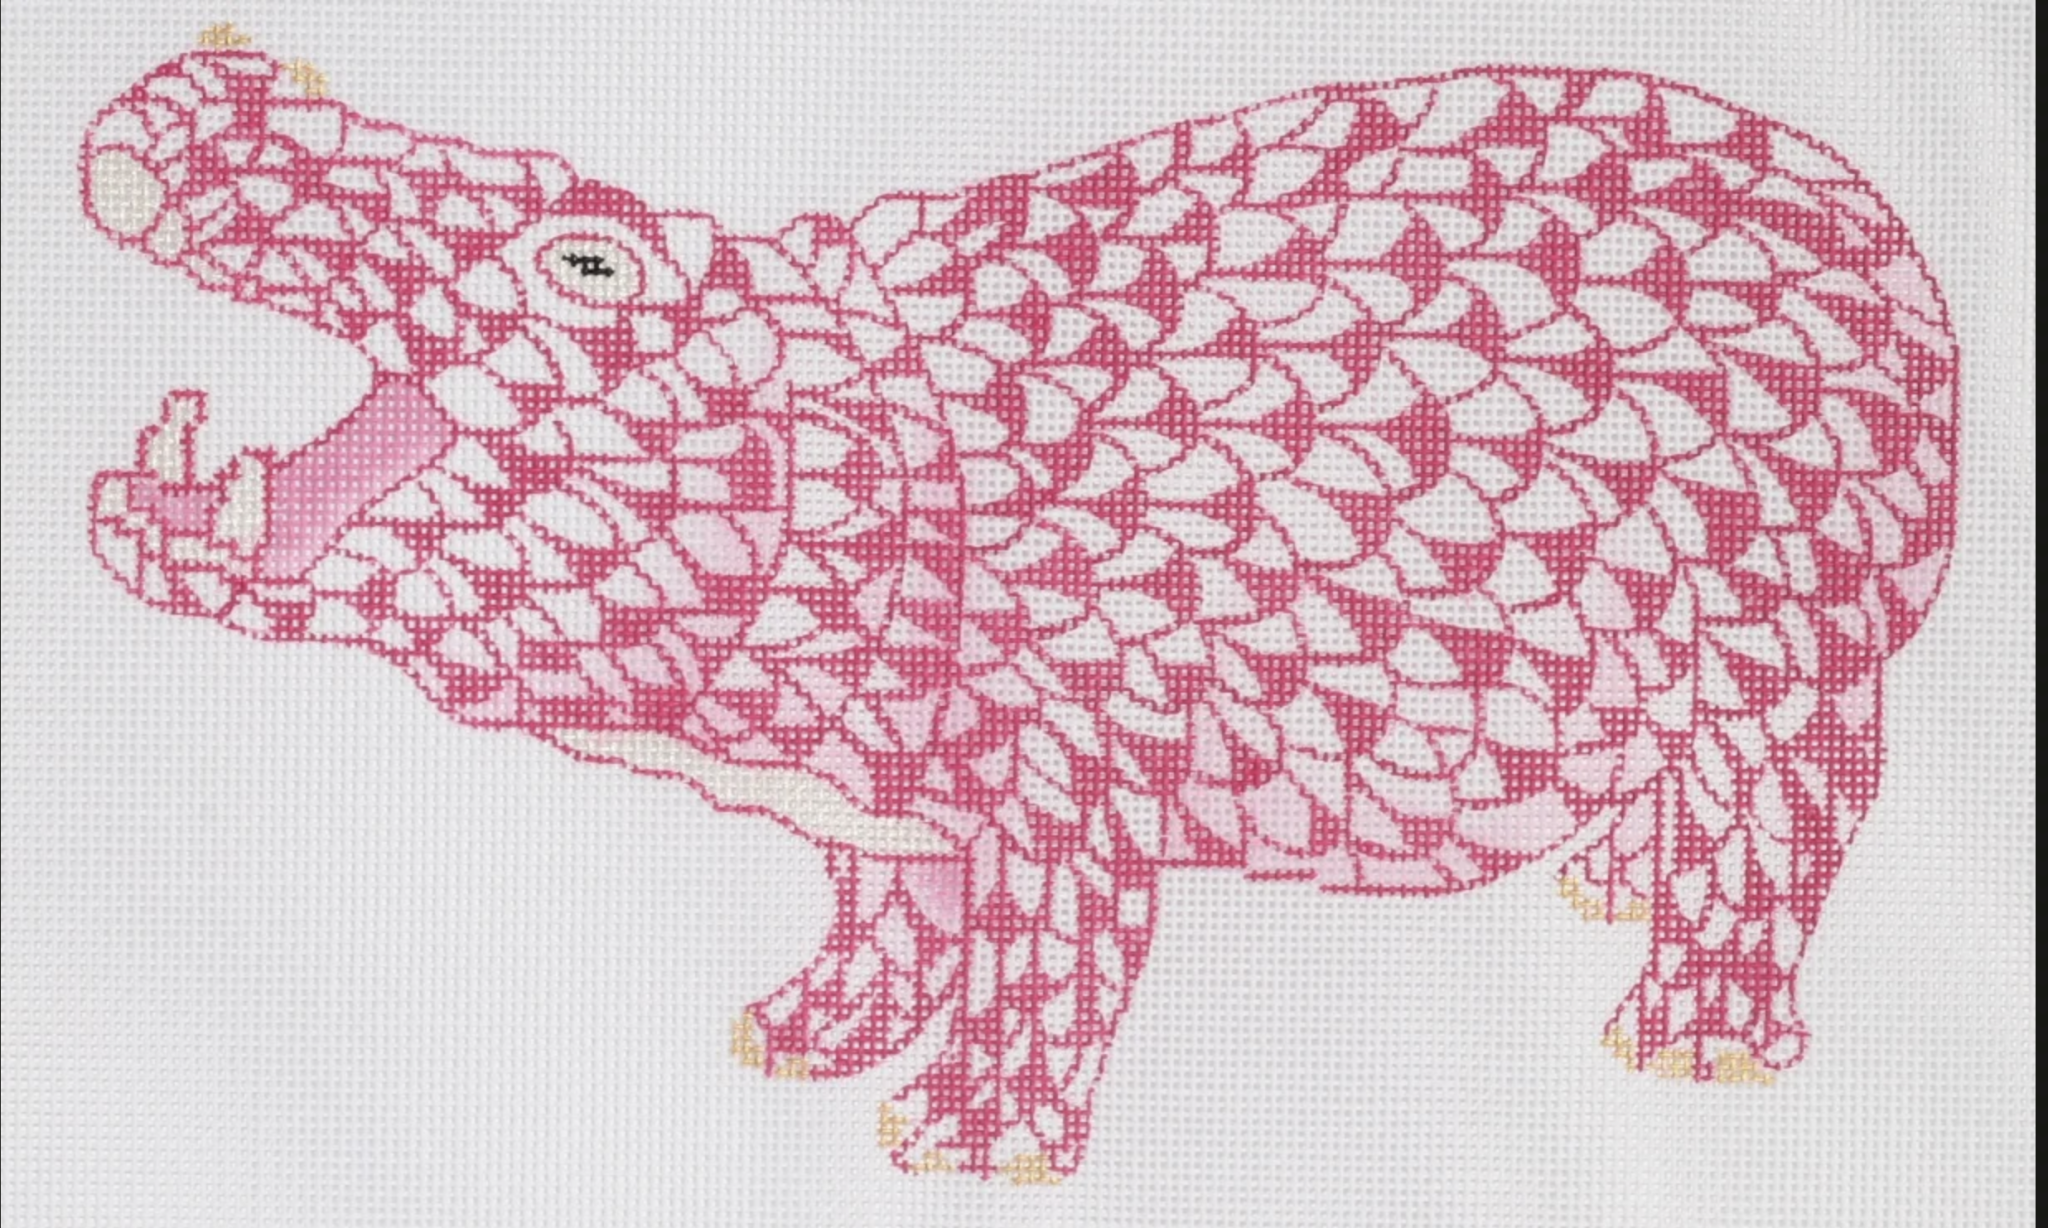 Canvas GOLD HEREND FISHNET PINK HIPPO  OM175